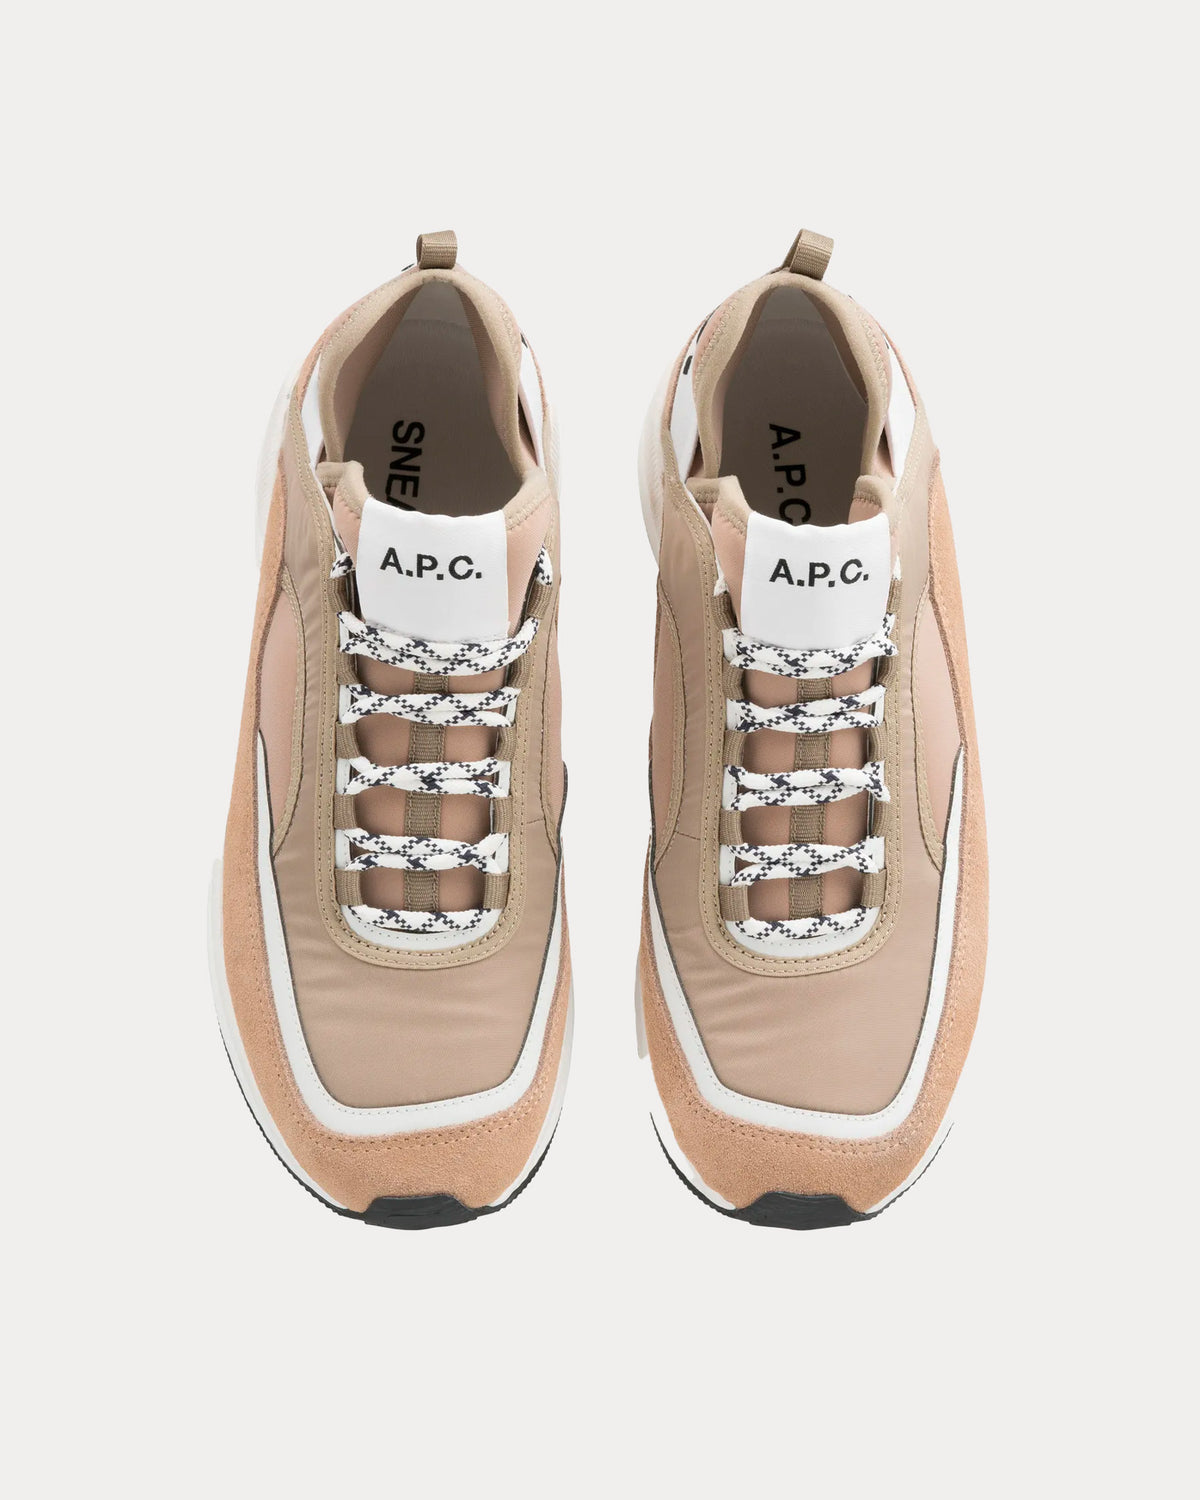 A.P.C. Run Around Taupe Low Top Sneakers - Sneak in Peace